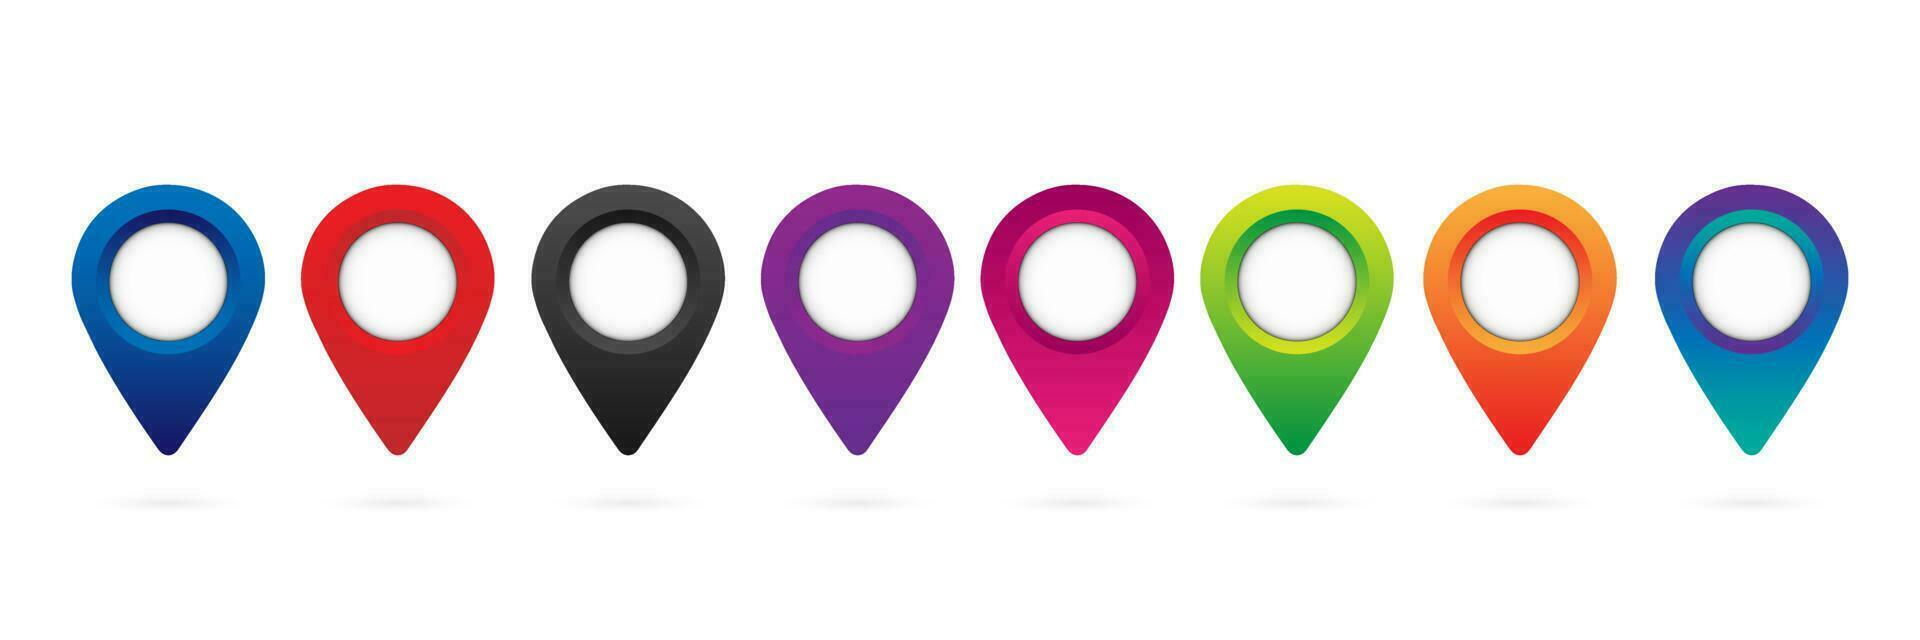 Map pin icons. Different color options map pins. Isolated vector illustration.